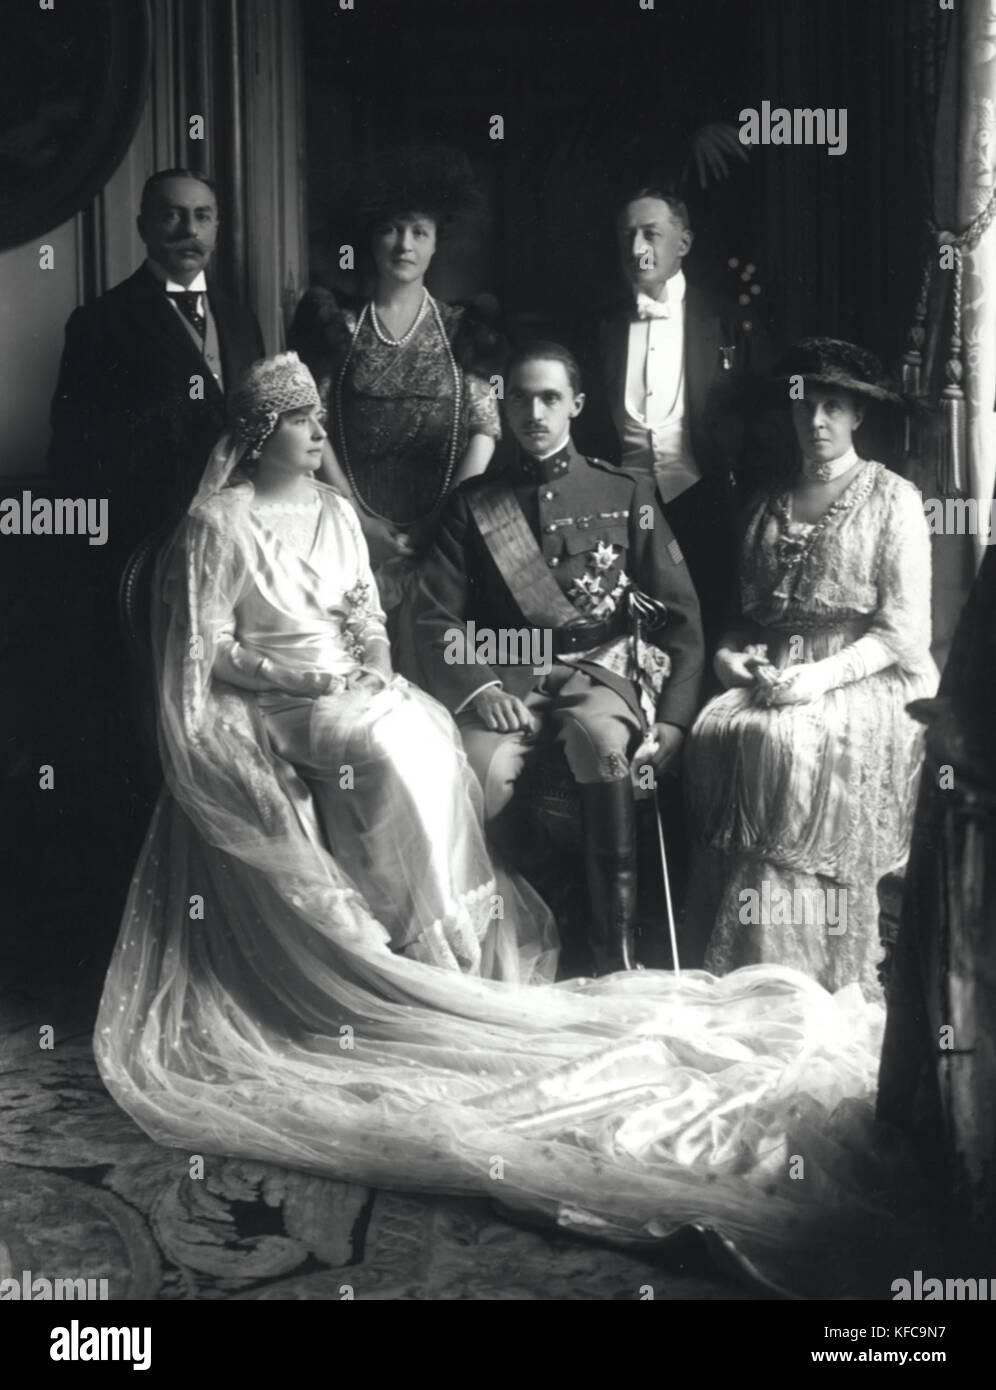 Prince Sixtus of Bourbon-Parma (1886-1934) and Hedwige de La Rochefoucauld (1896-1986) on their wedding day in Paris on November 12, 1919.  On right, the Duchess of Doudeauville.  Boissonnas and Taponier Photo Photo12.com - Coll. Taponier Stock Photo